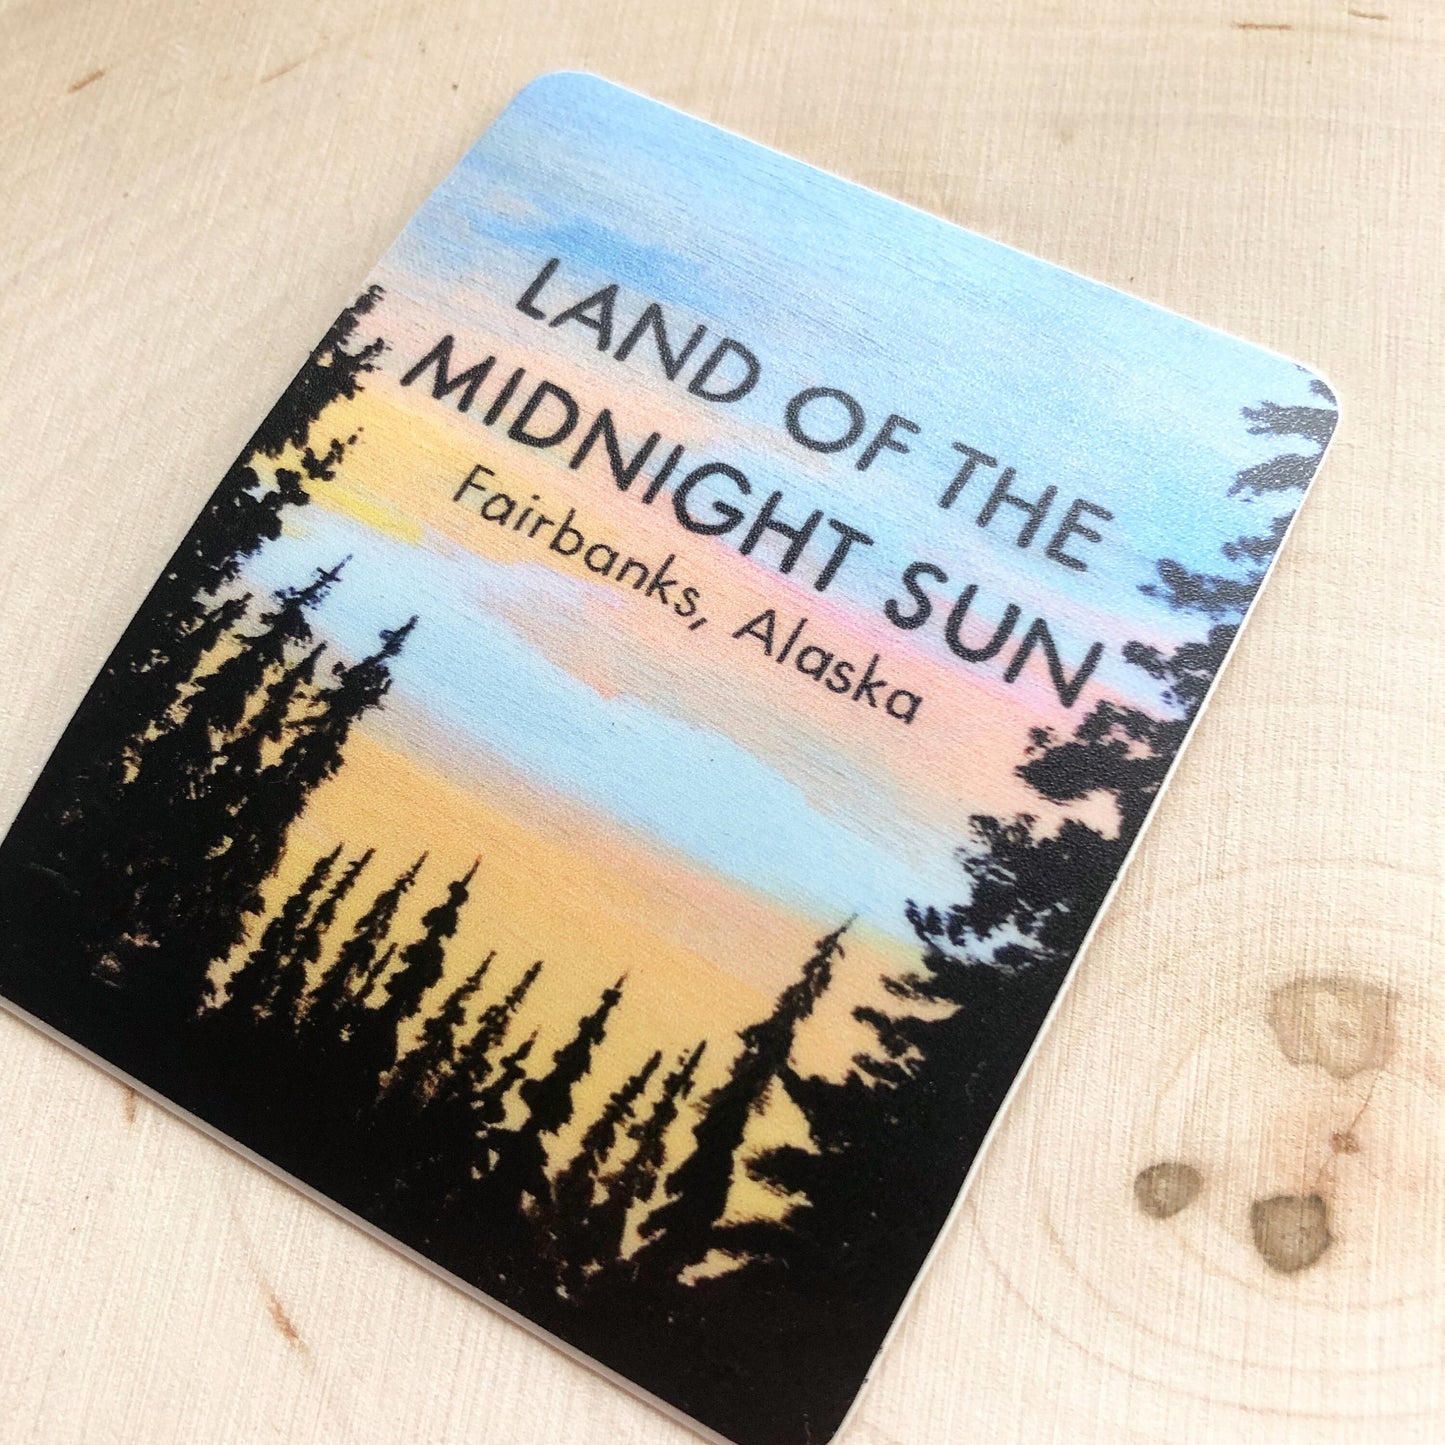 Land of the Midnight Sun Sticker by Anya Toelle